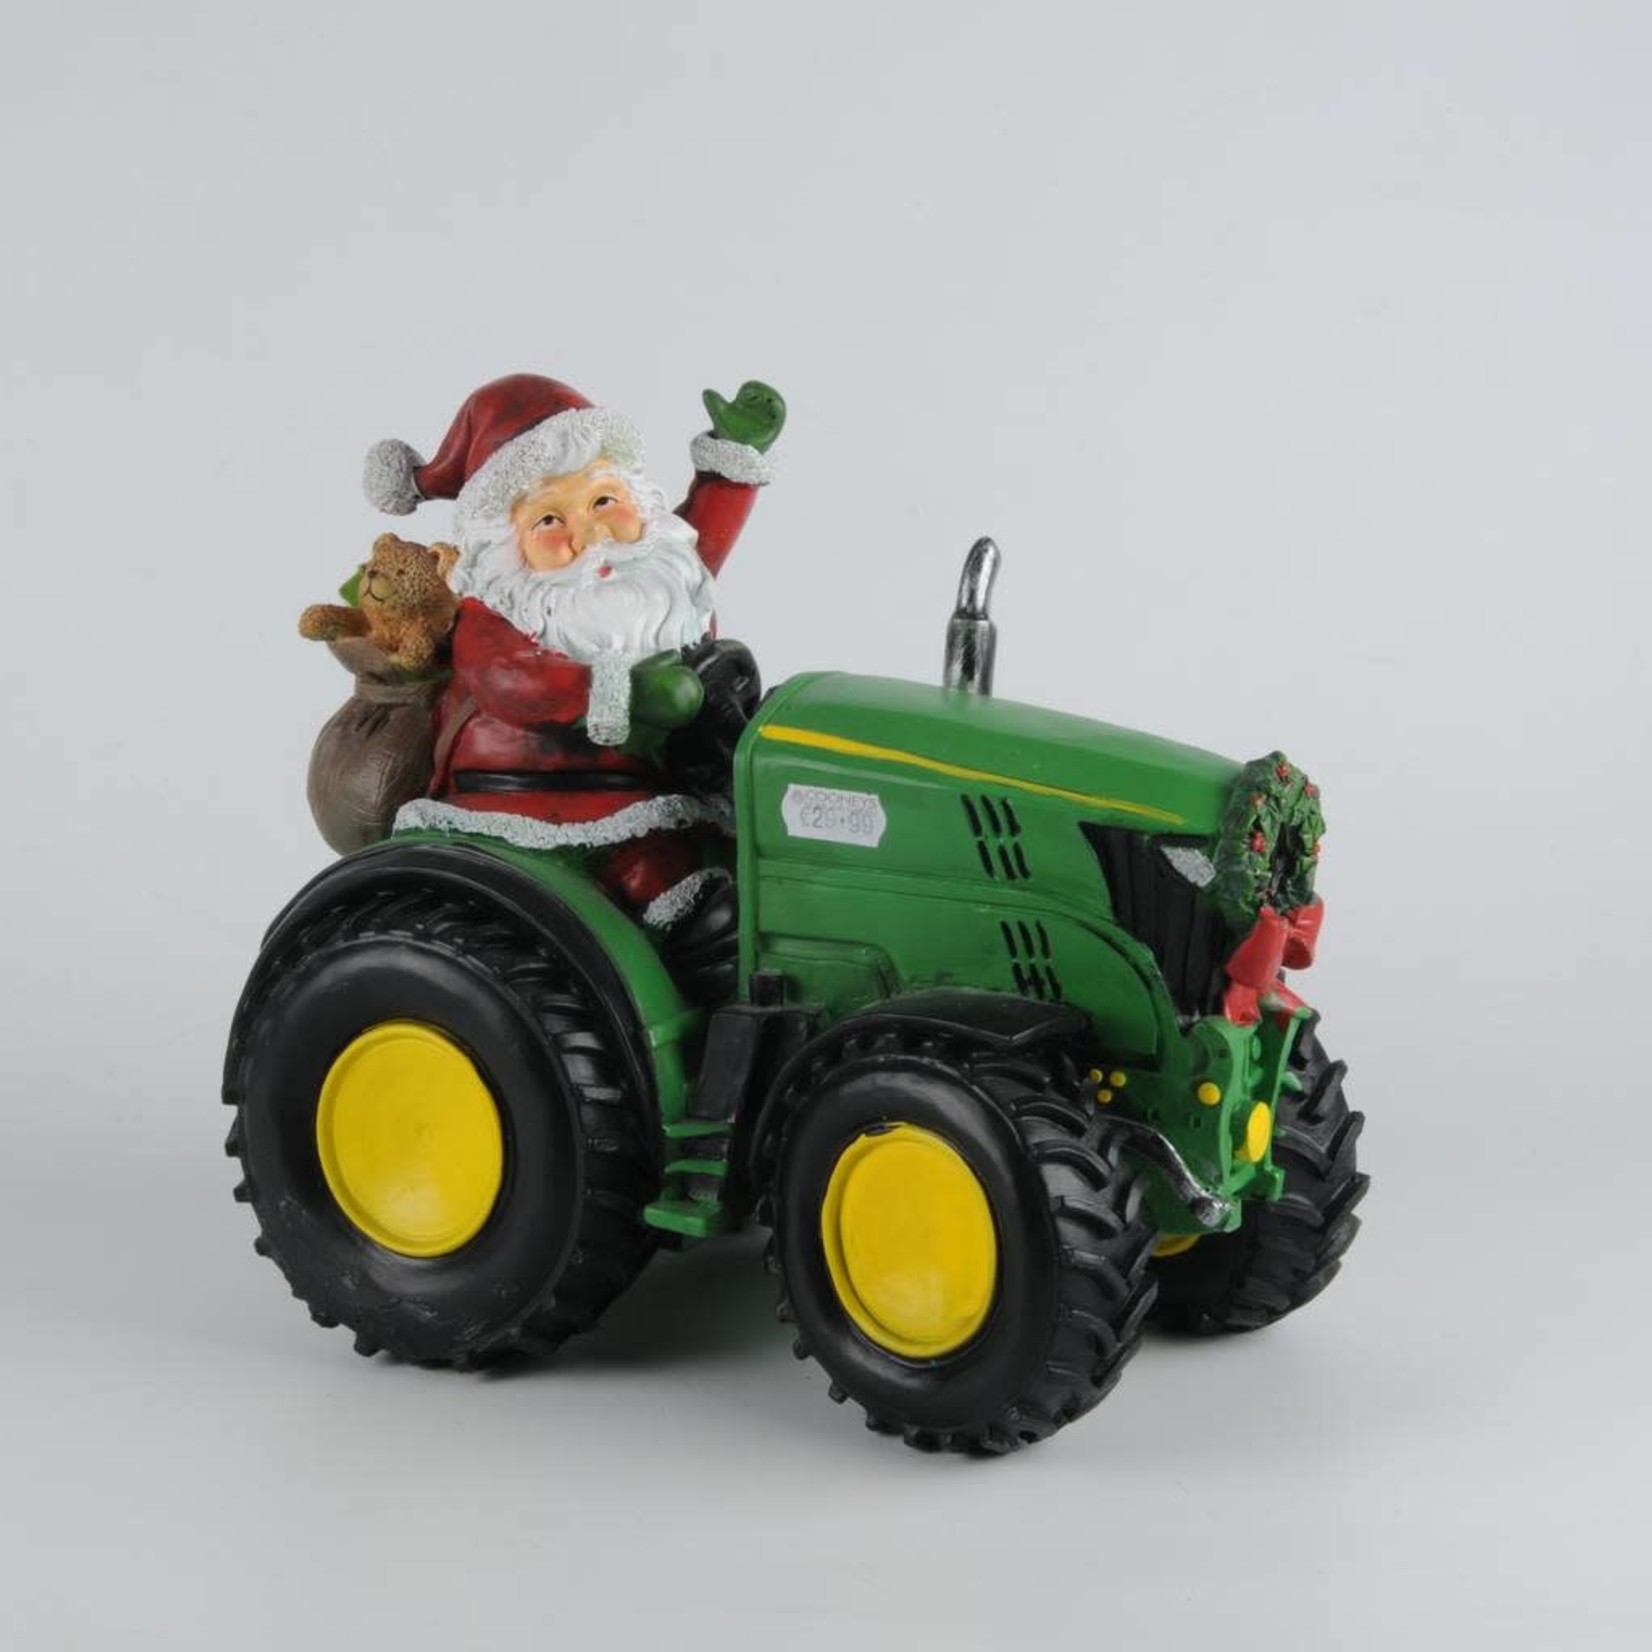 Western Grave Products Santa On Tractor Green 24X18X22Cm